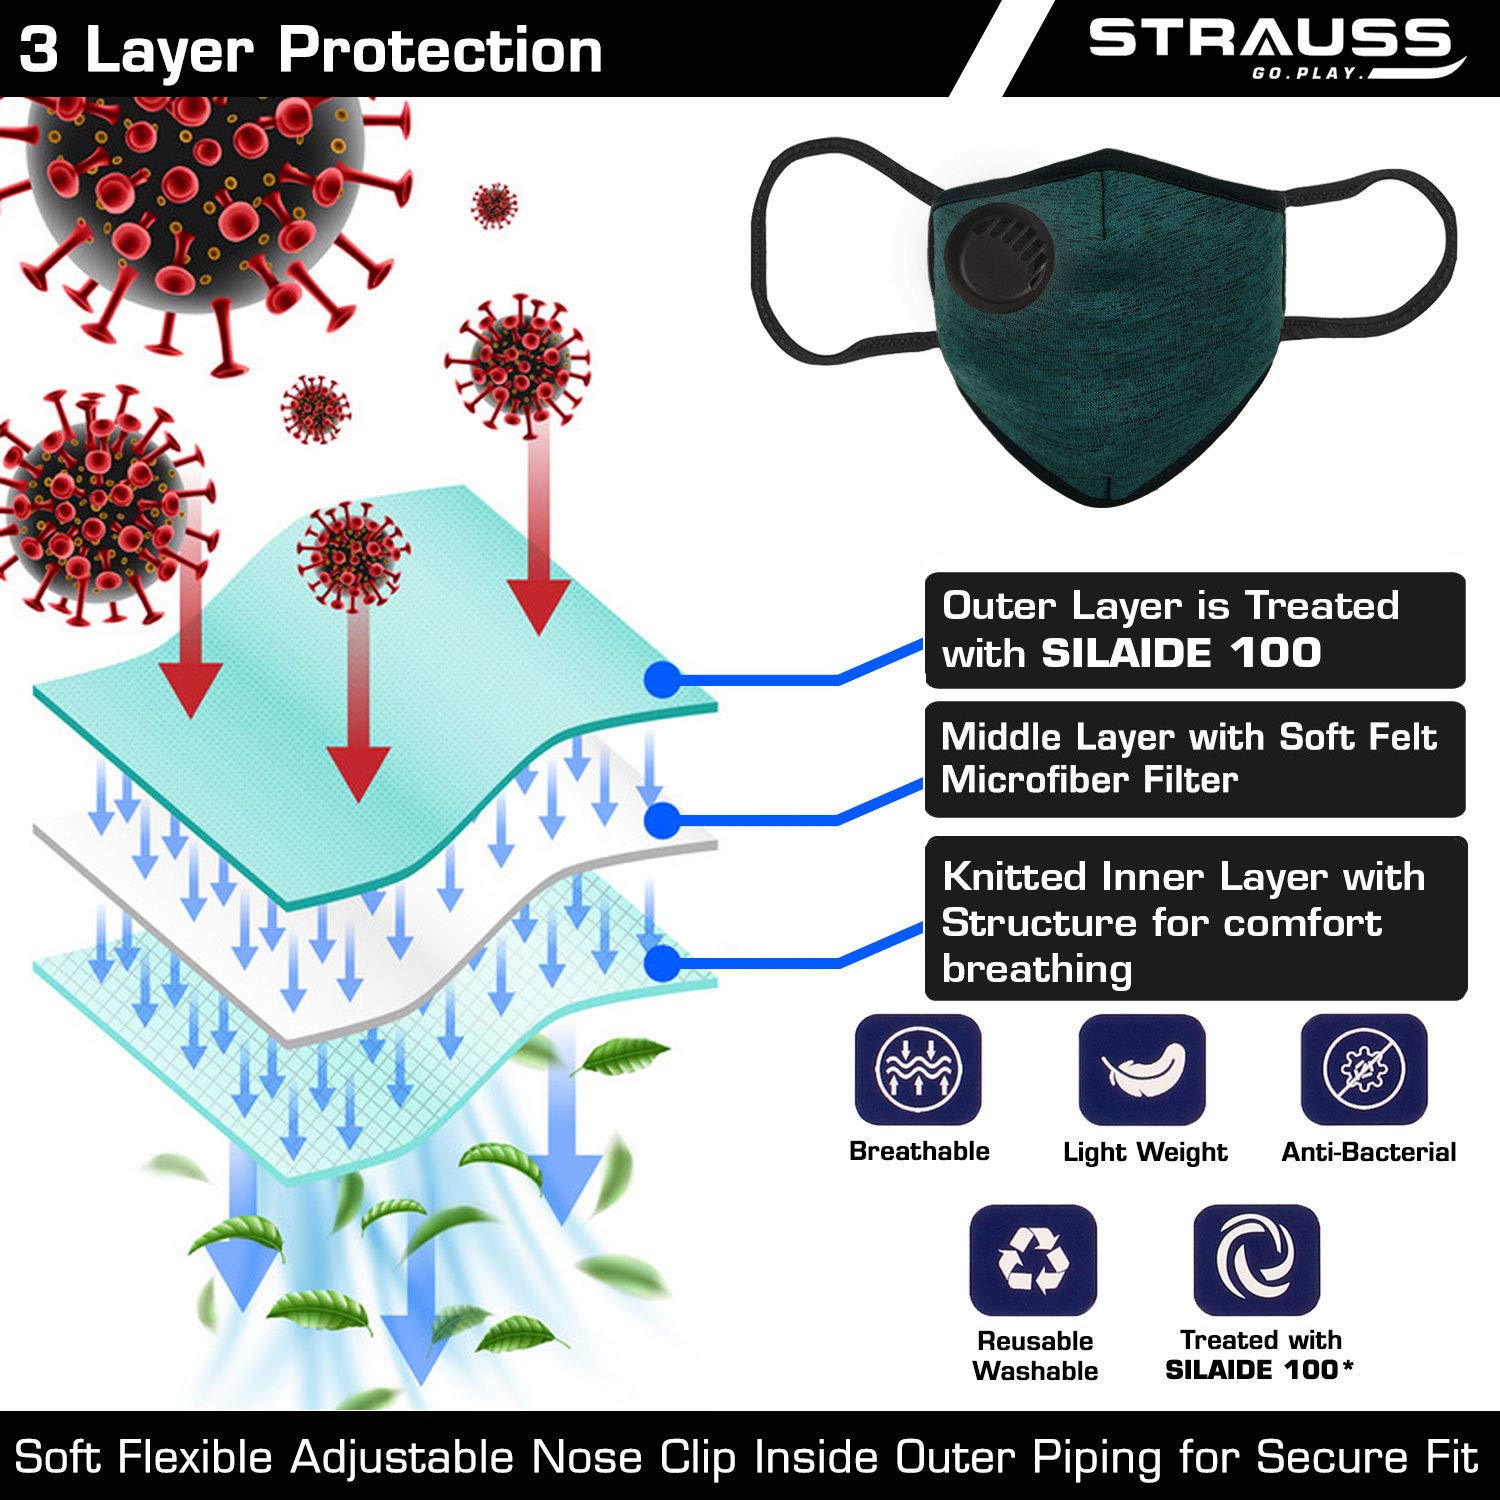 STRAUSS Unisex Anti-Bacterial Protection Mask, Non Vent, Large, (Red)